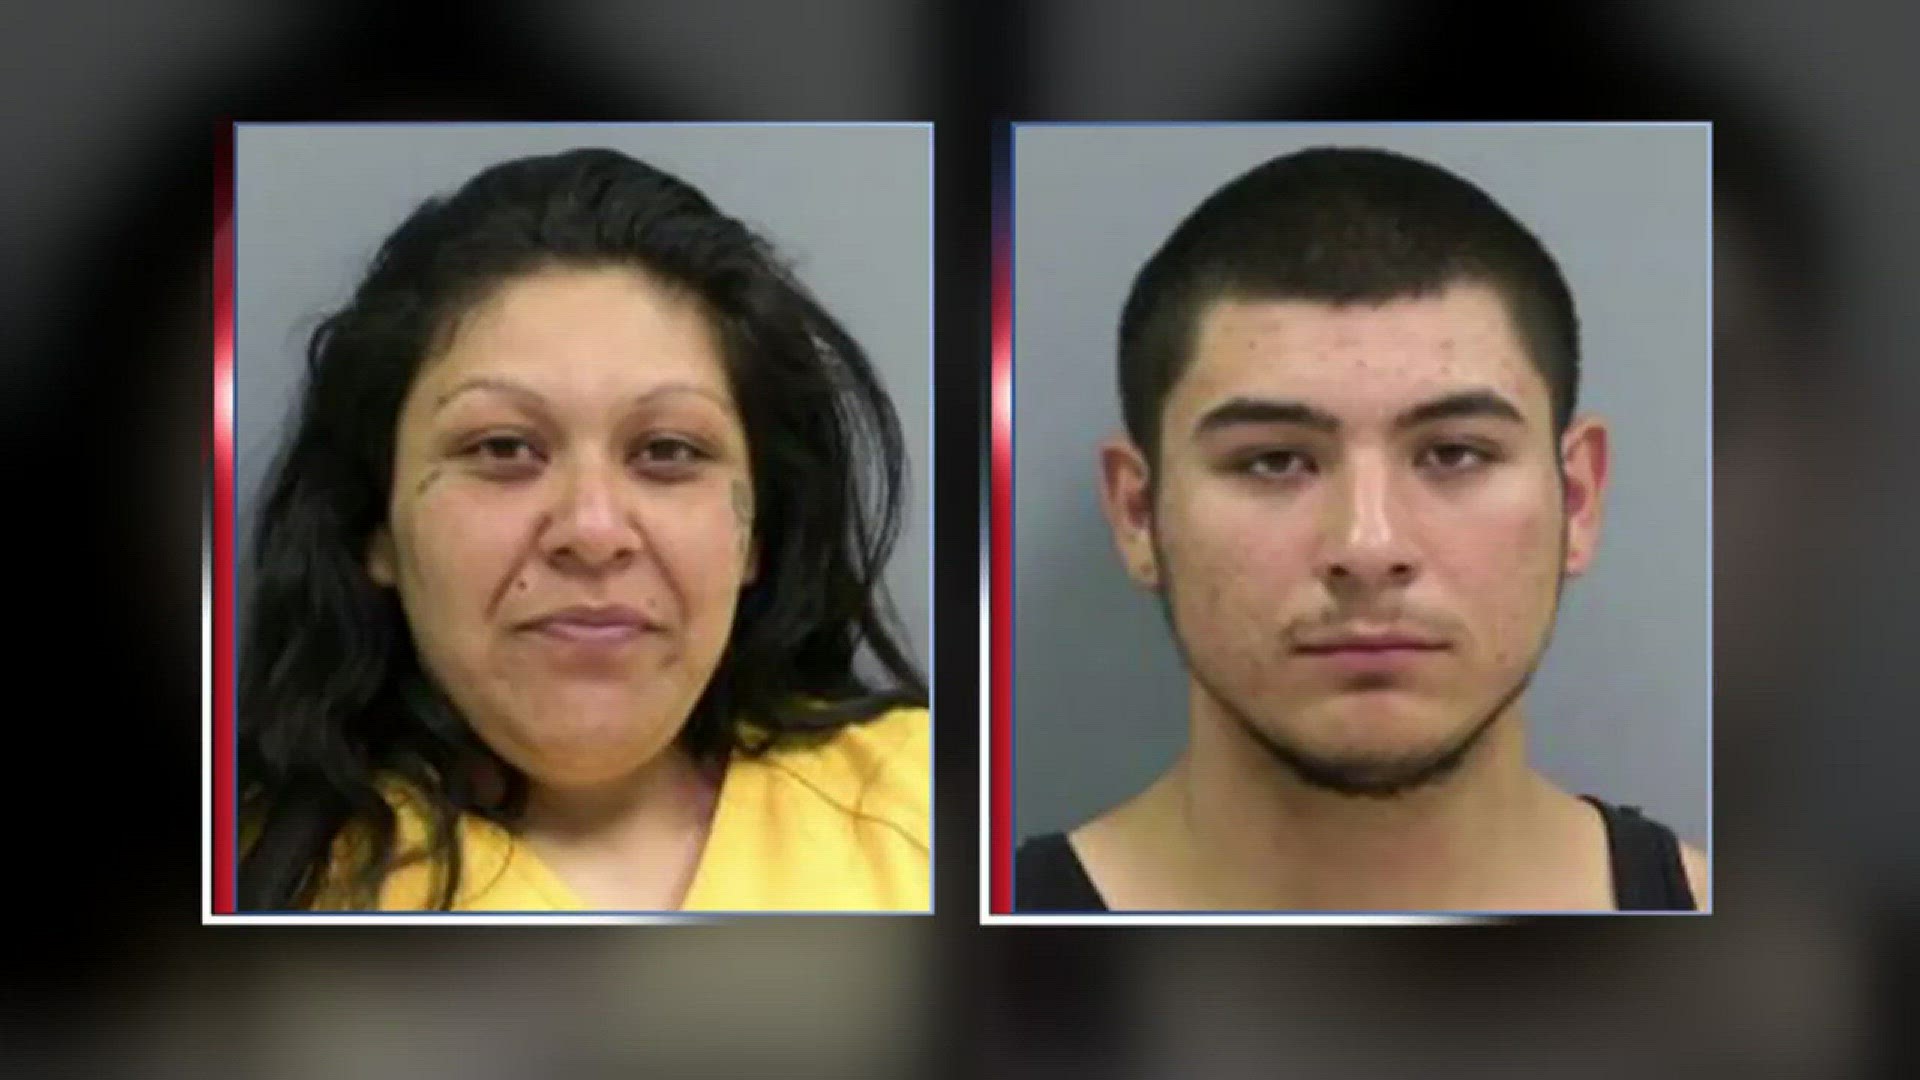 Mother And Son Incest Porn Forced To Have - Mother and son charged with incest, fight for relationship | 12news.com